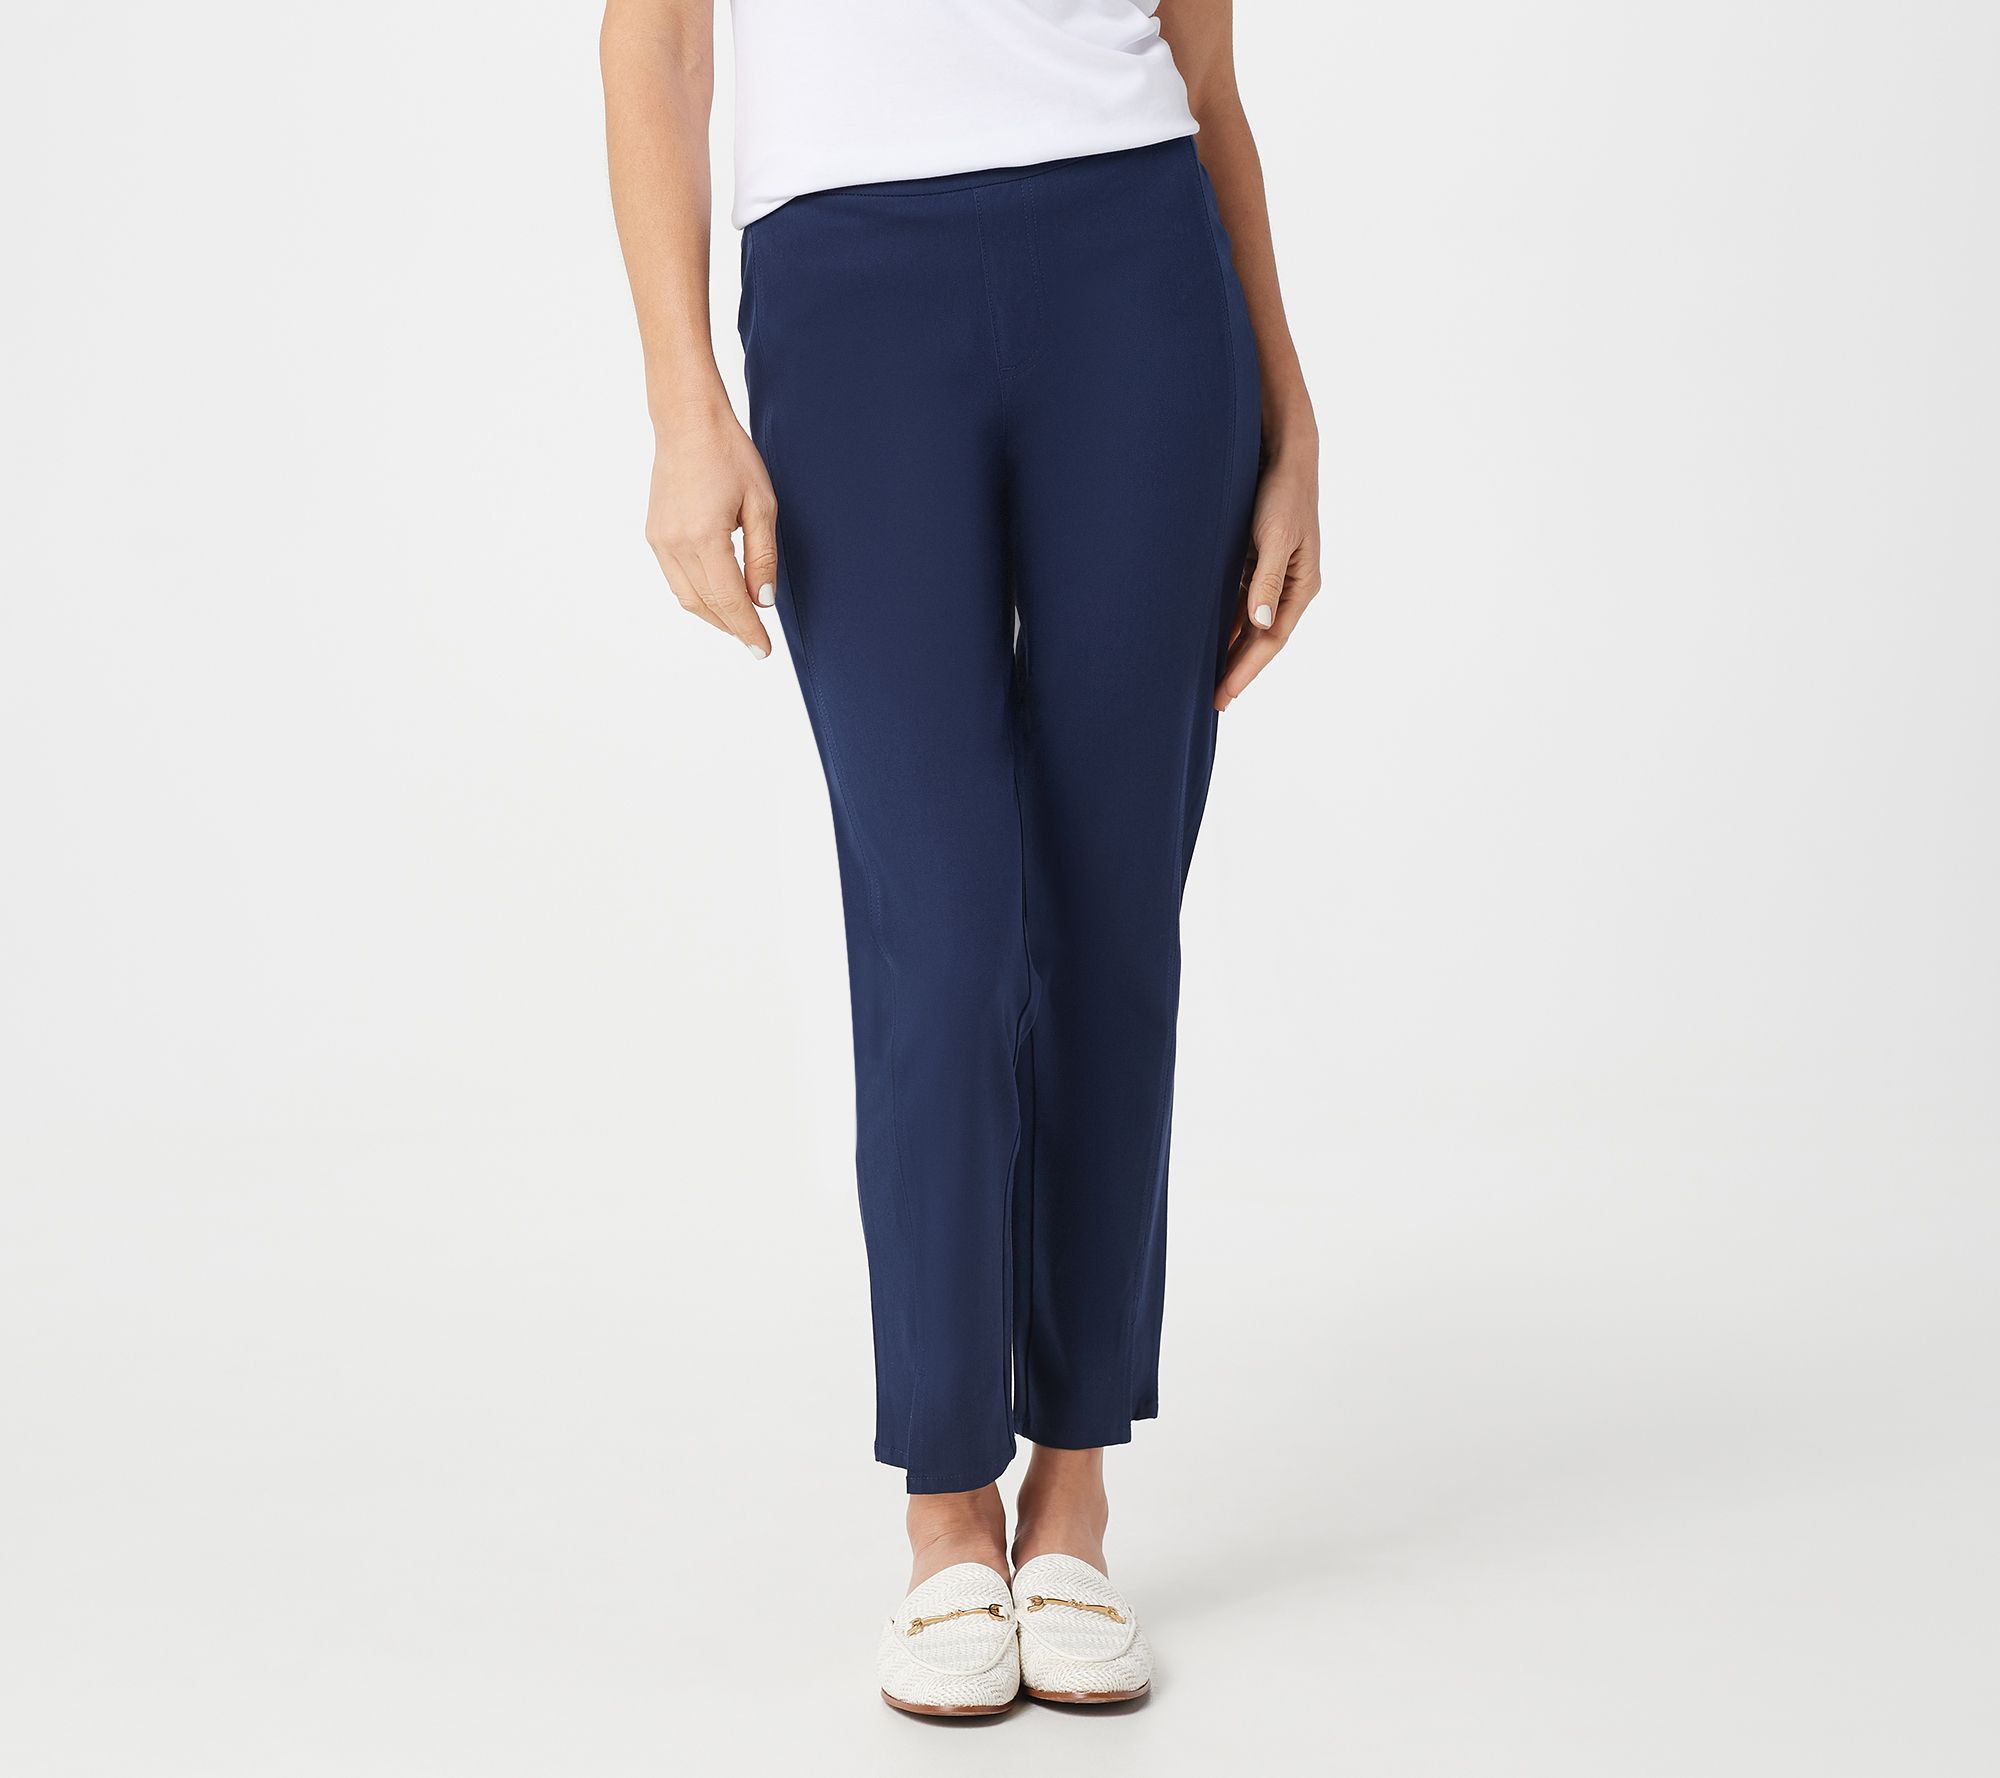 Isaac Mizrahi Live! Special Edition Tall 24/7 Stretch Ankle Pants - QVC.com